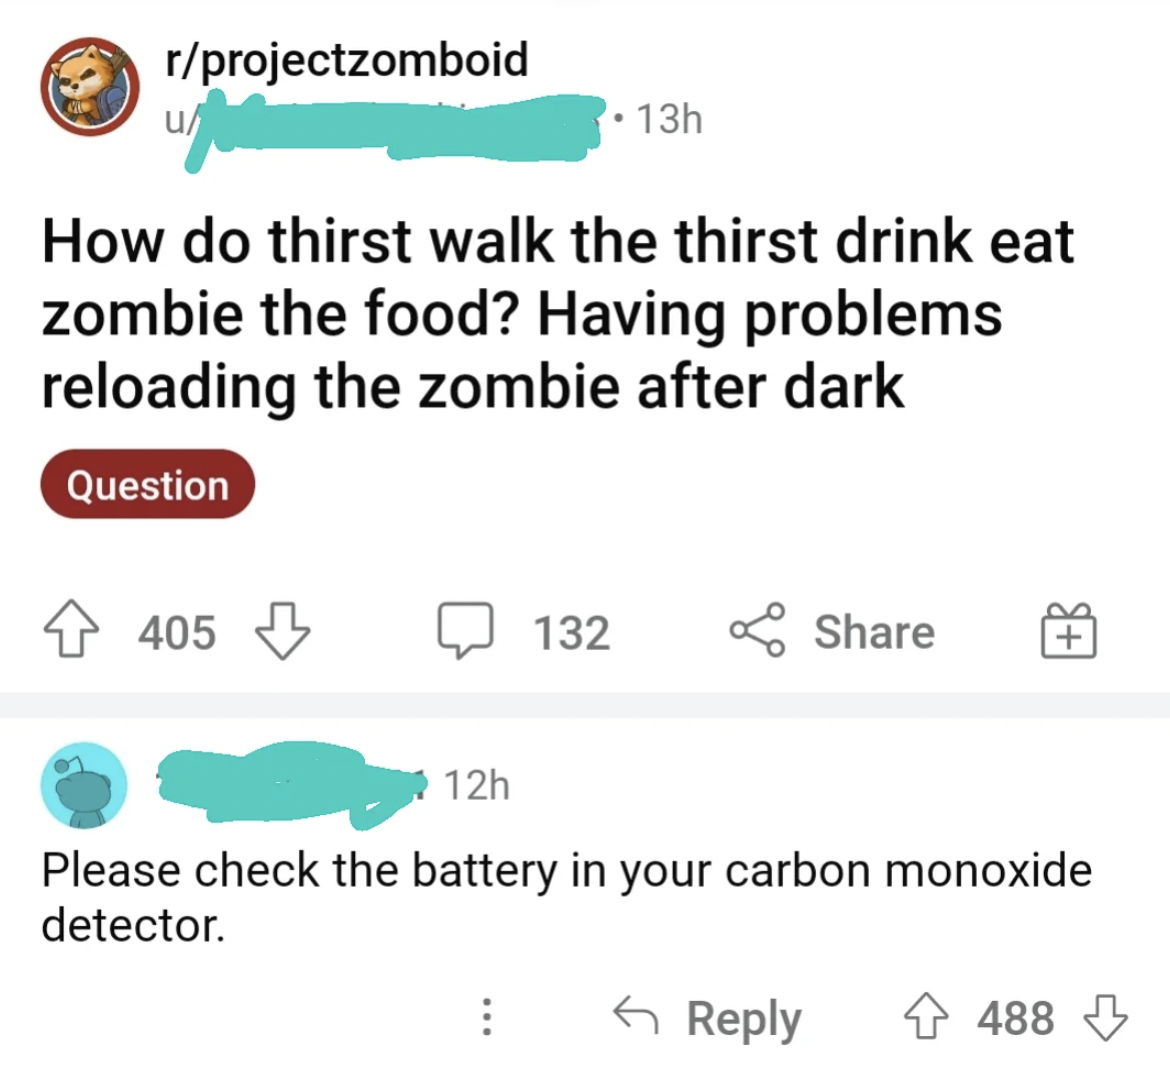 diagram - rprojectzomboid u How do thirst walk the thirst drink eat zombie the food? Having problems reloading the zombie after dark Question 405 13h 132 12h Please check the battery in your carbon monoxide detector. 4488